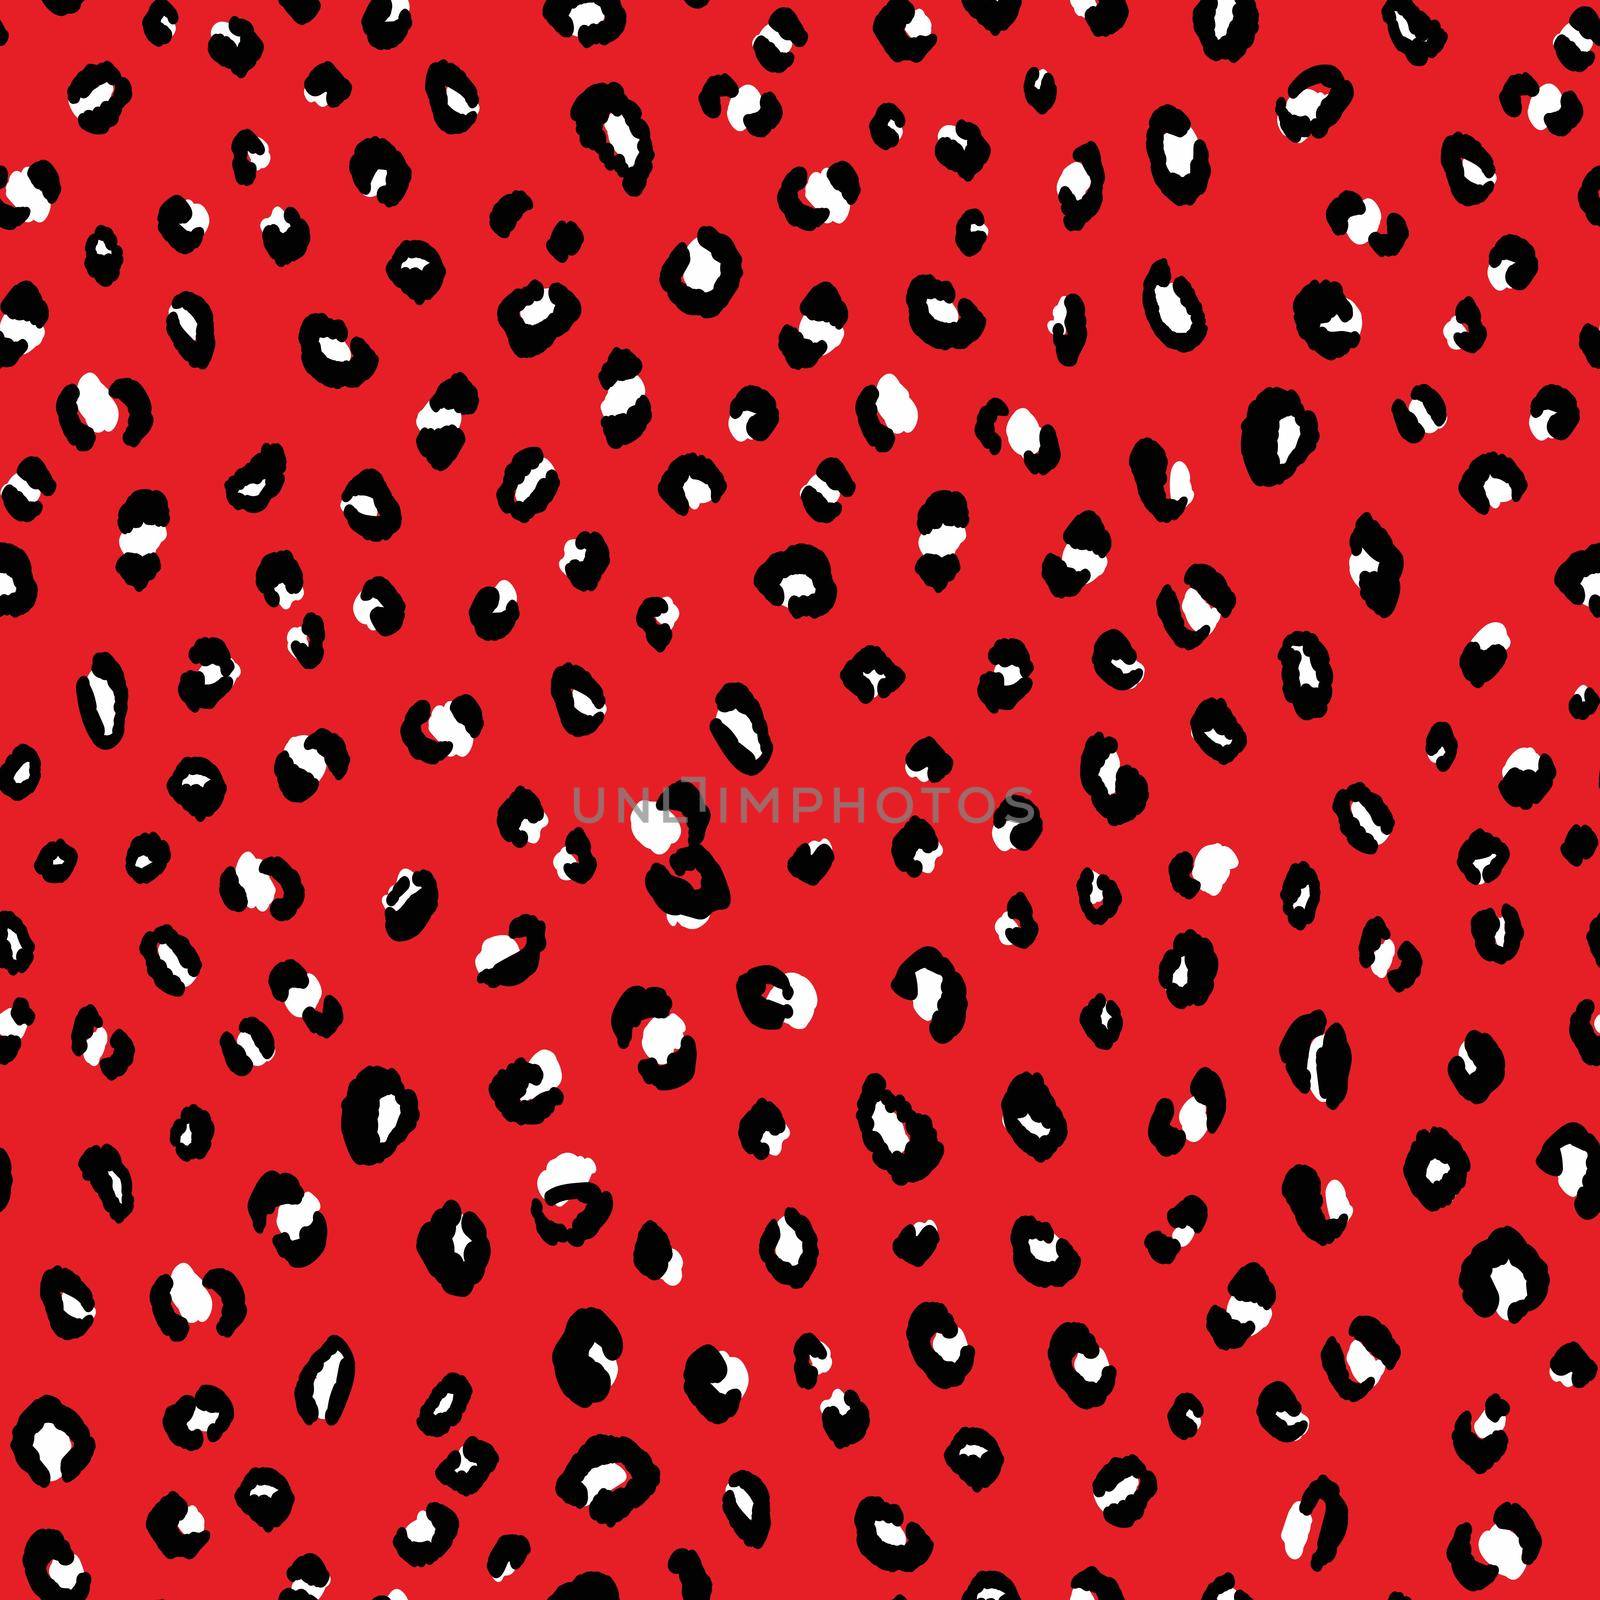 Abstract modern leopard seamless pattern. Animals trendy background. Red and black decorative vector stock illustration for print, card, postcard, fabric, textile. Modern ornament of stylized skin.